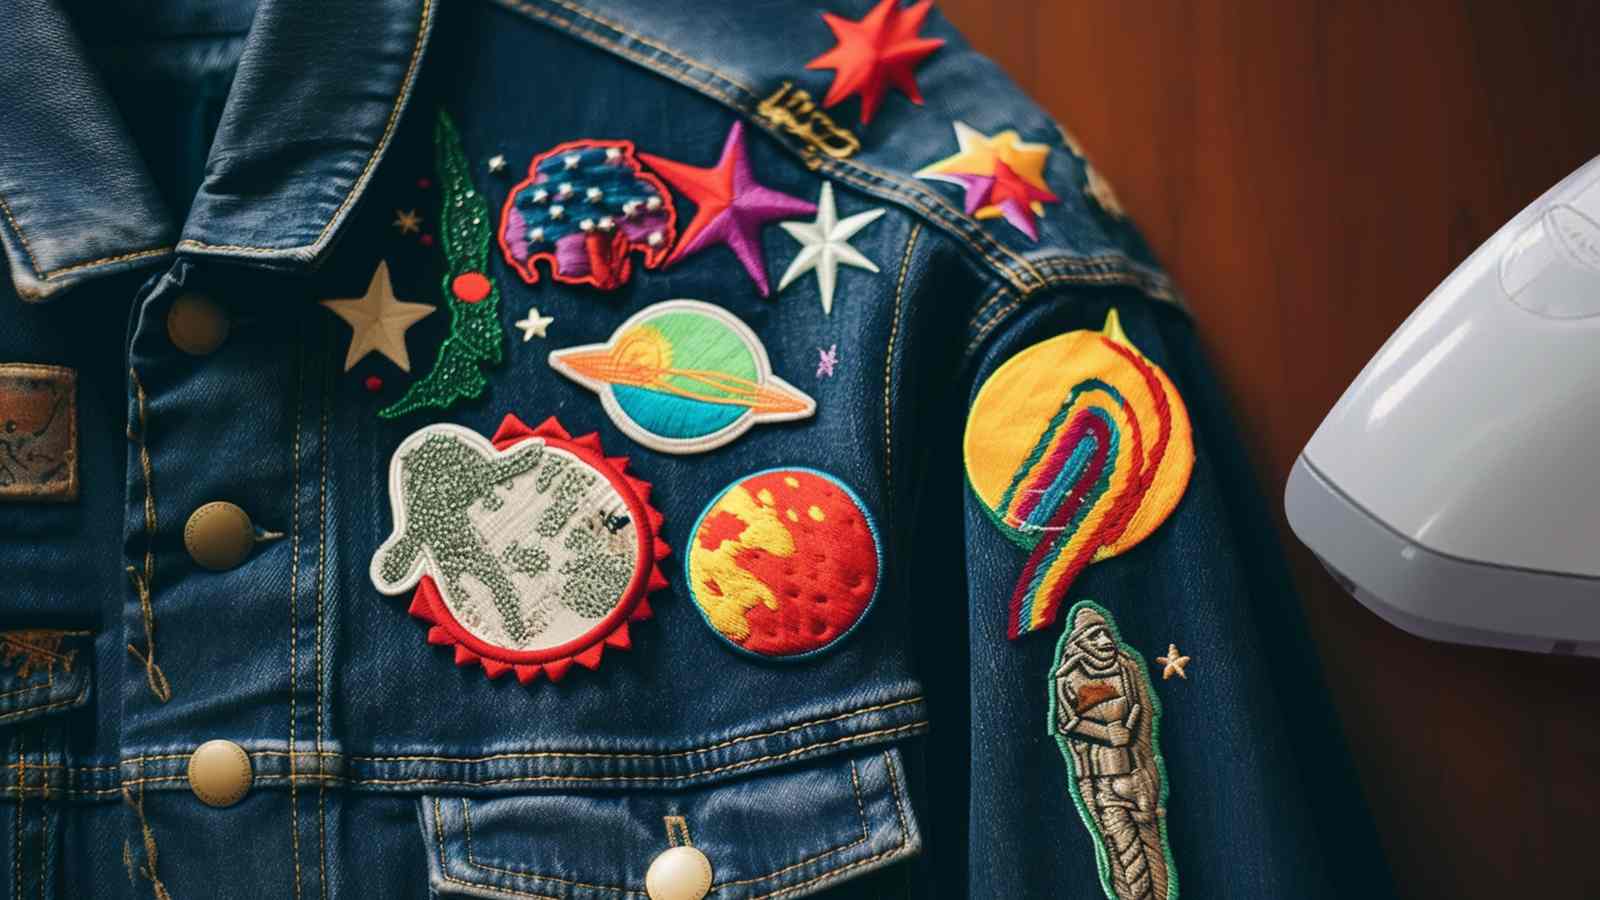 A denim jacket with patches and a sewing machine.